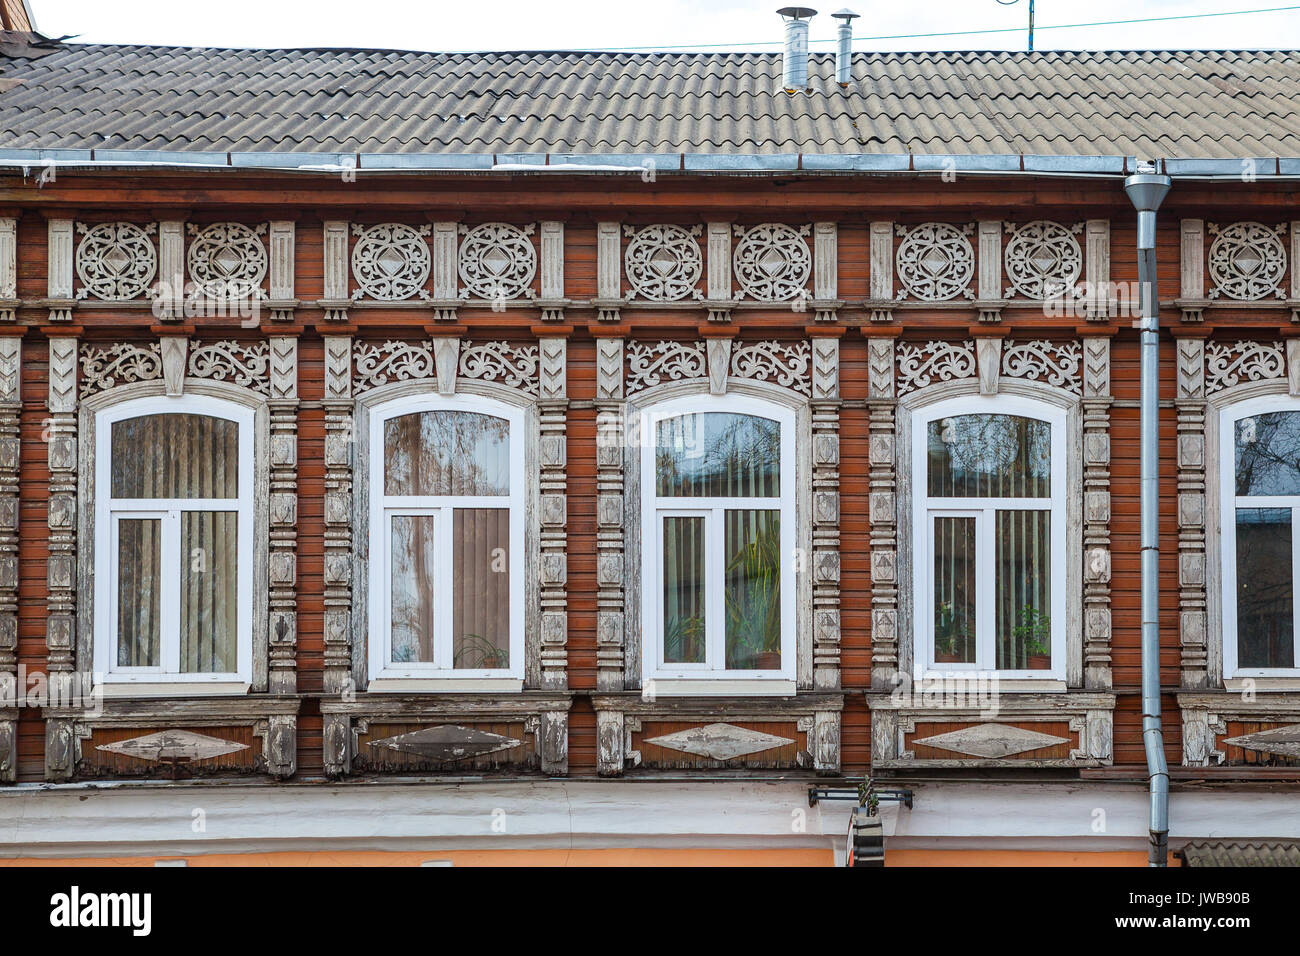 Wall of wooden traditional russian house with windows and carved frames and pattern Stock Photo